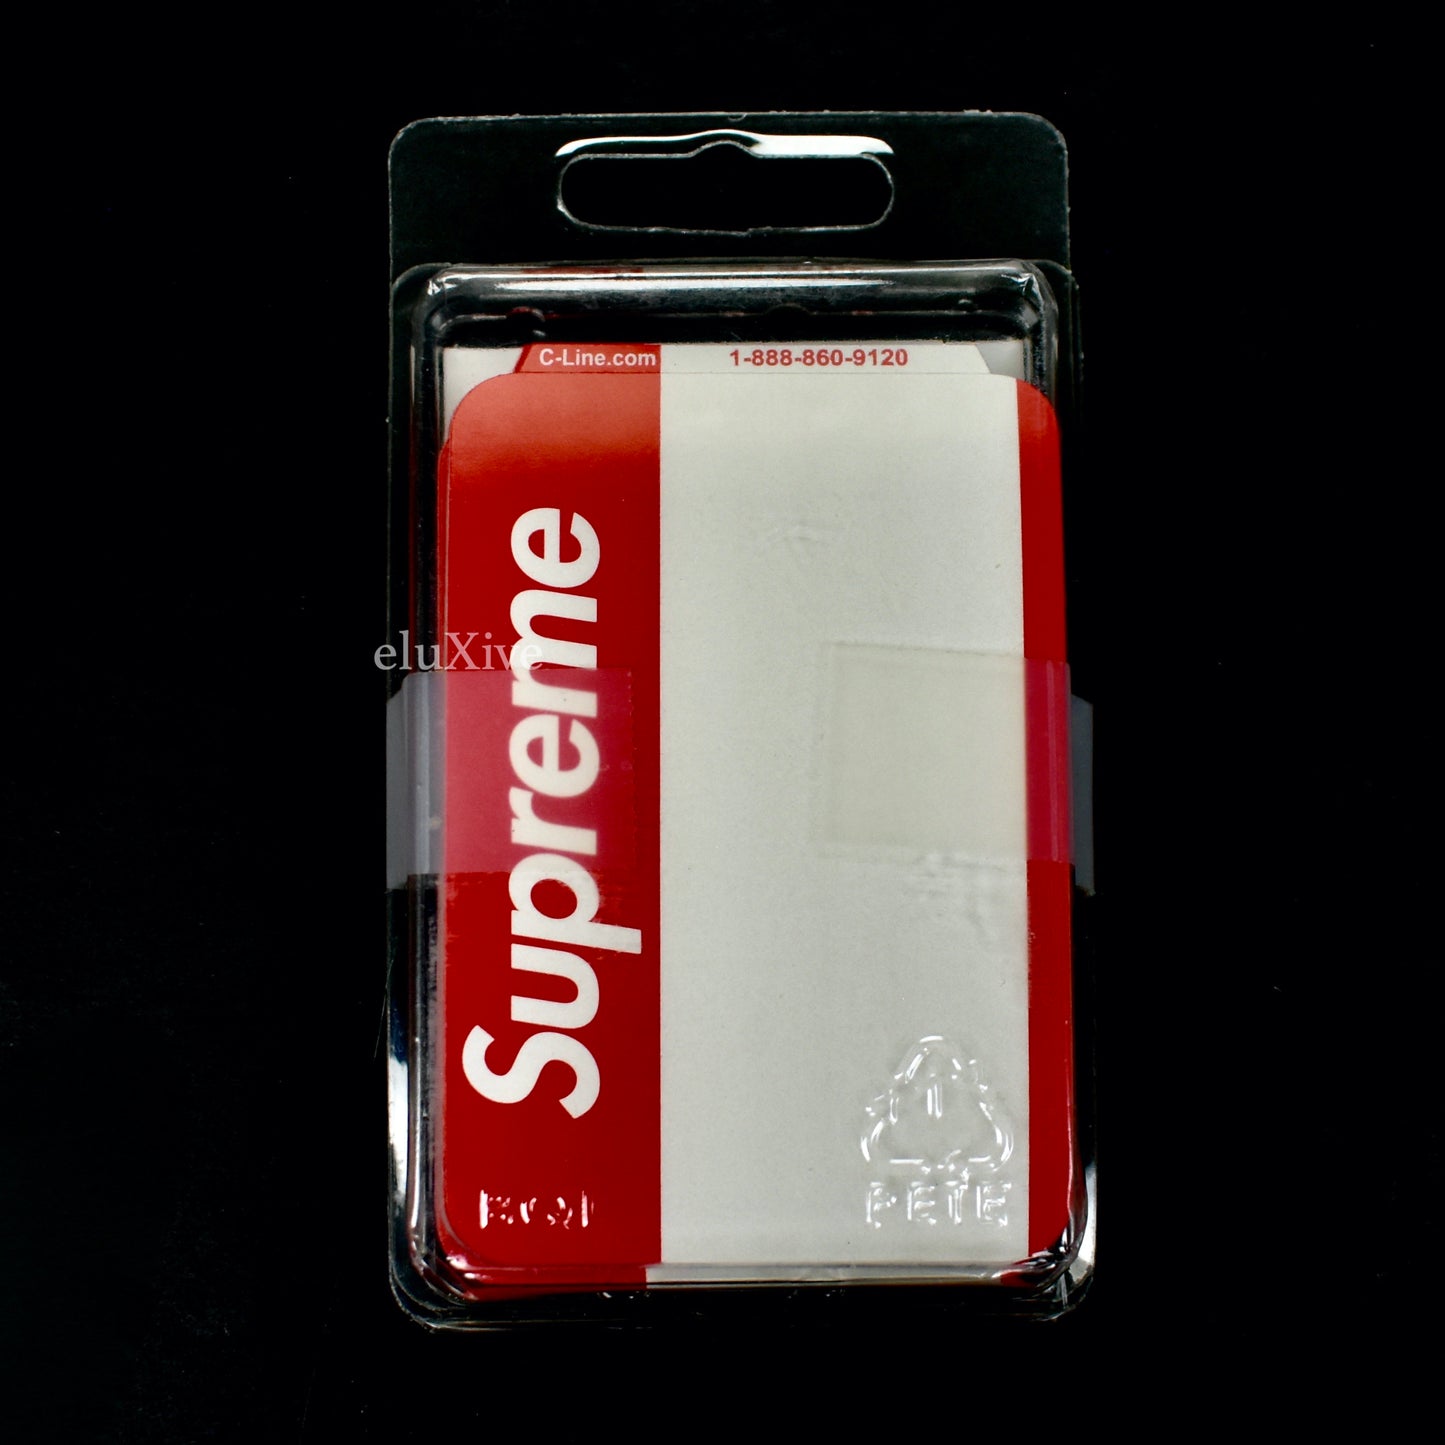 SOLD OUT (Red Box Logo)' Sticker